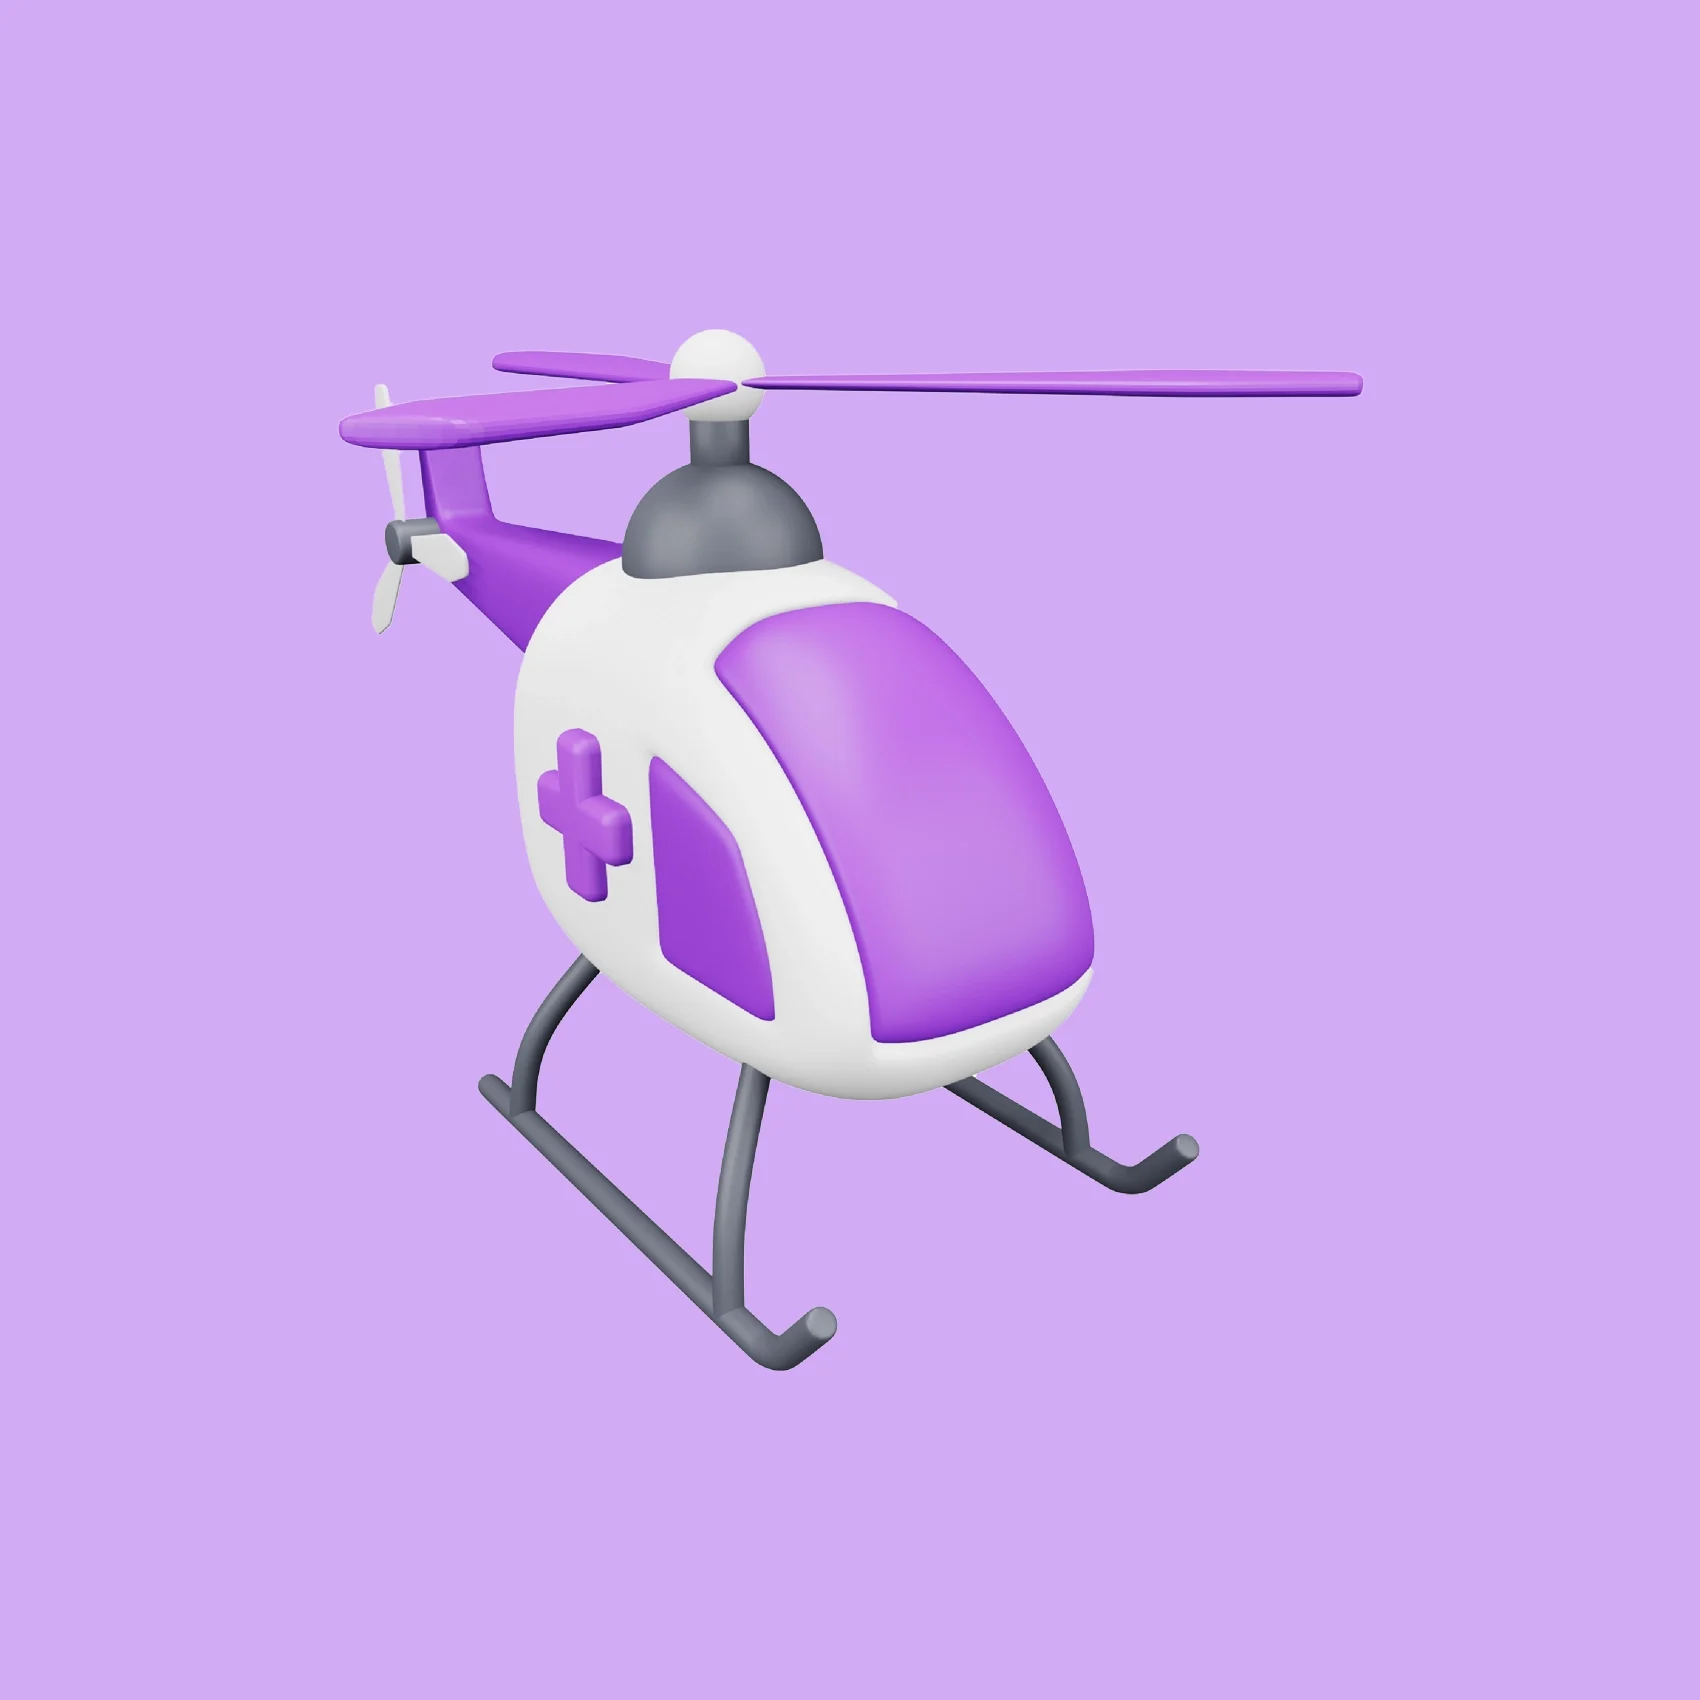 helicopter